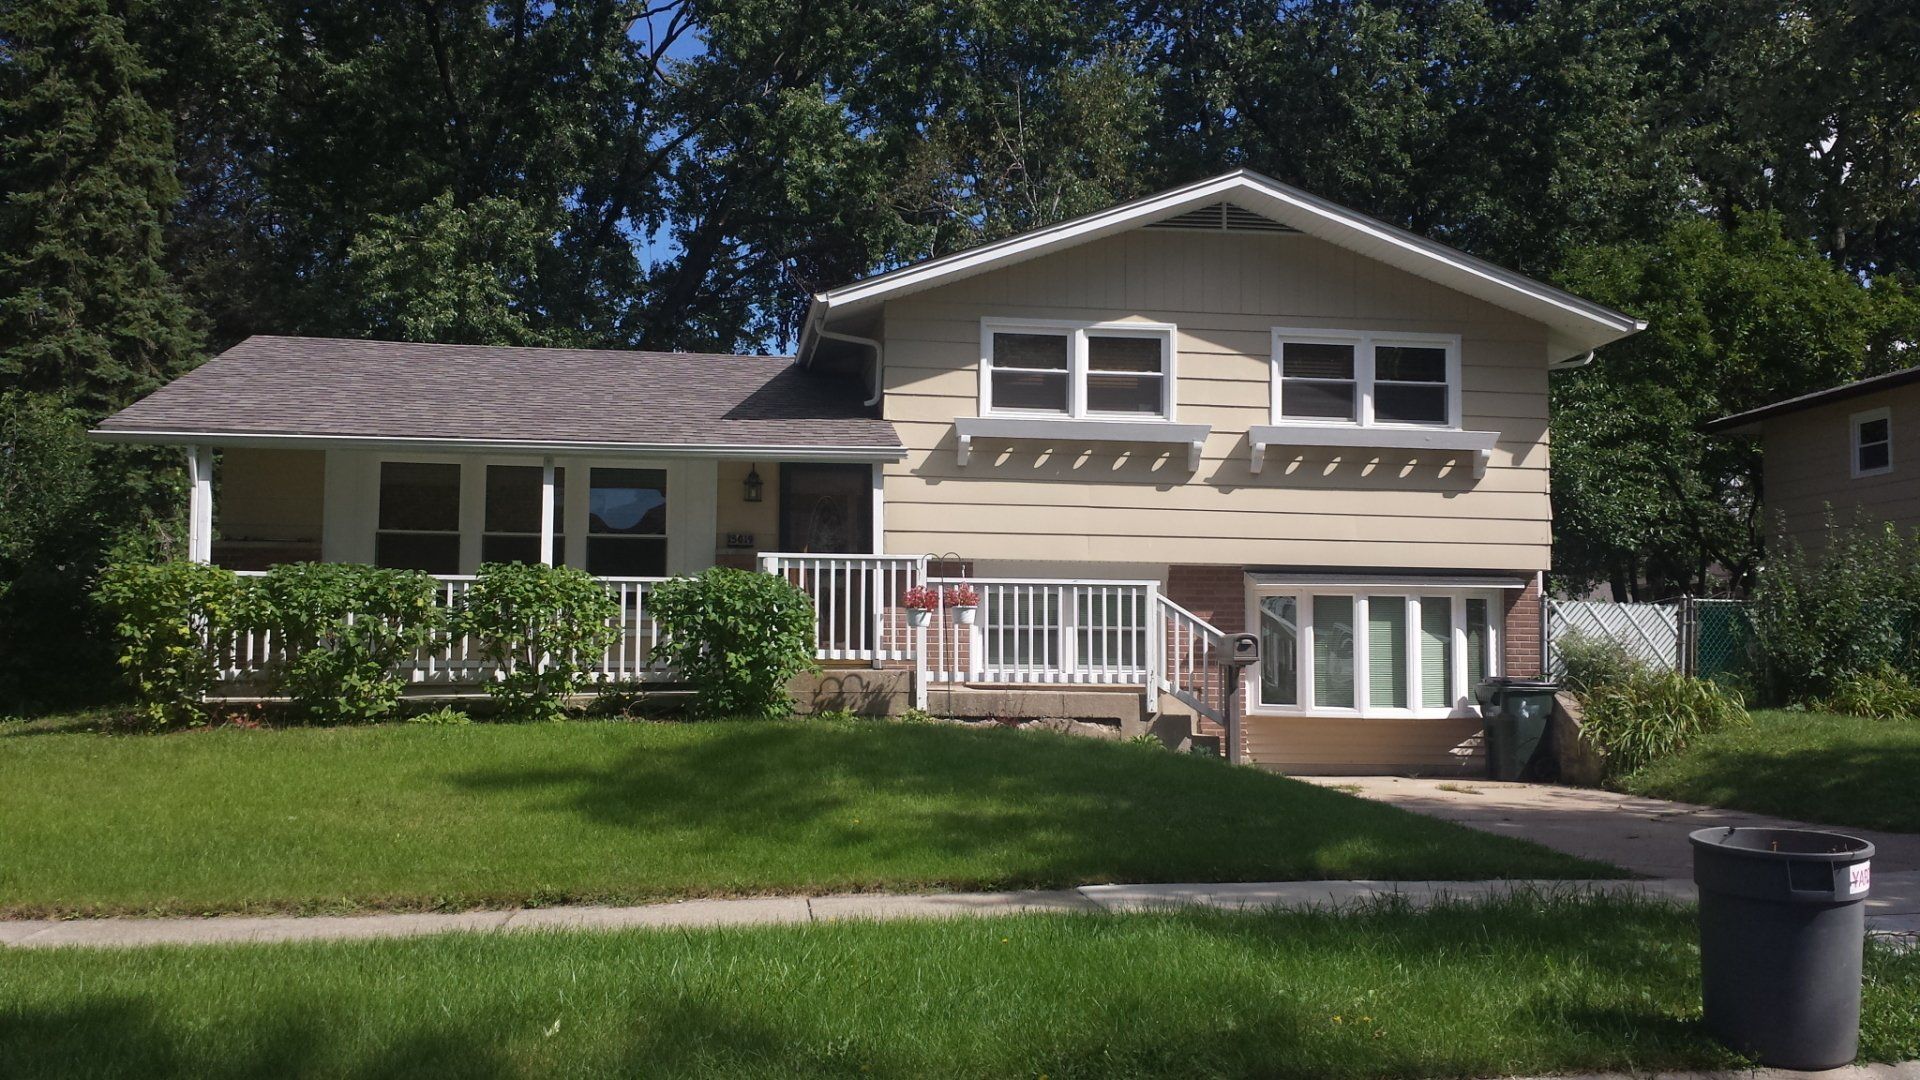 This home was completed in the summer of 2014 Oak Forest, IL